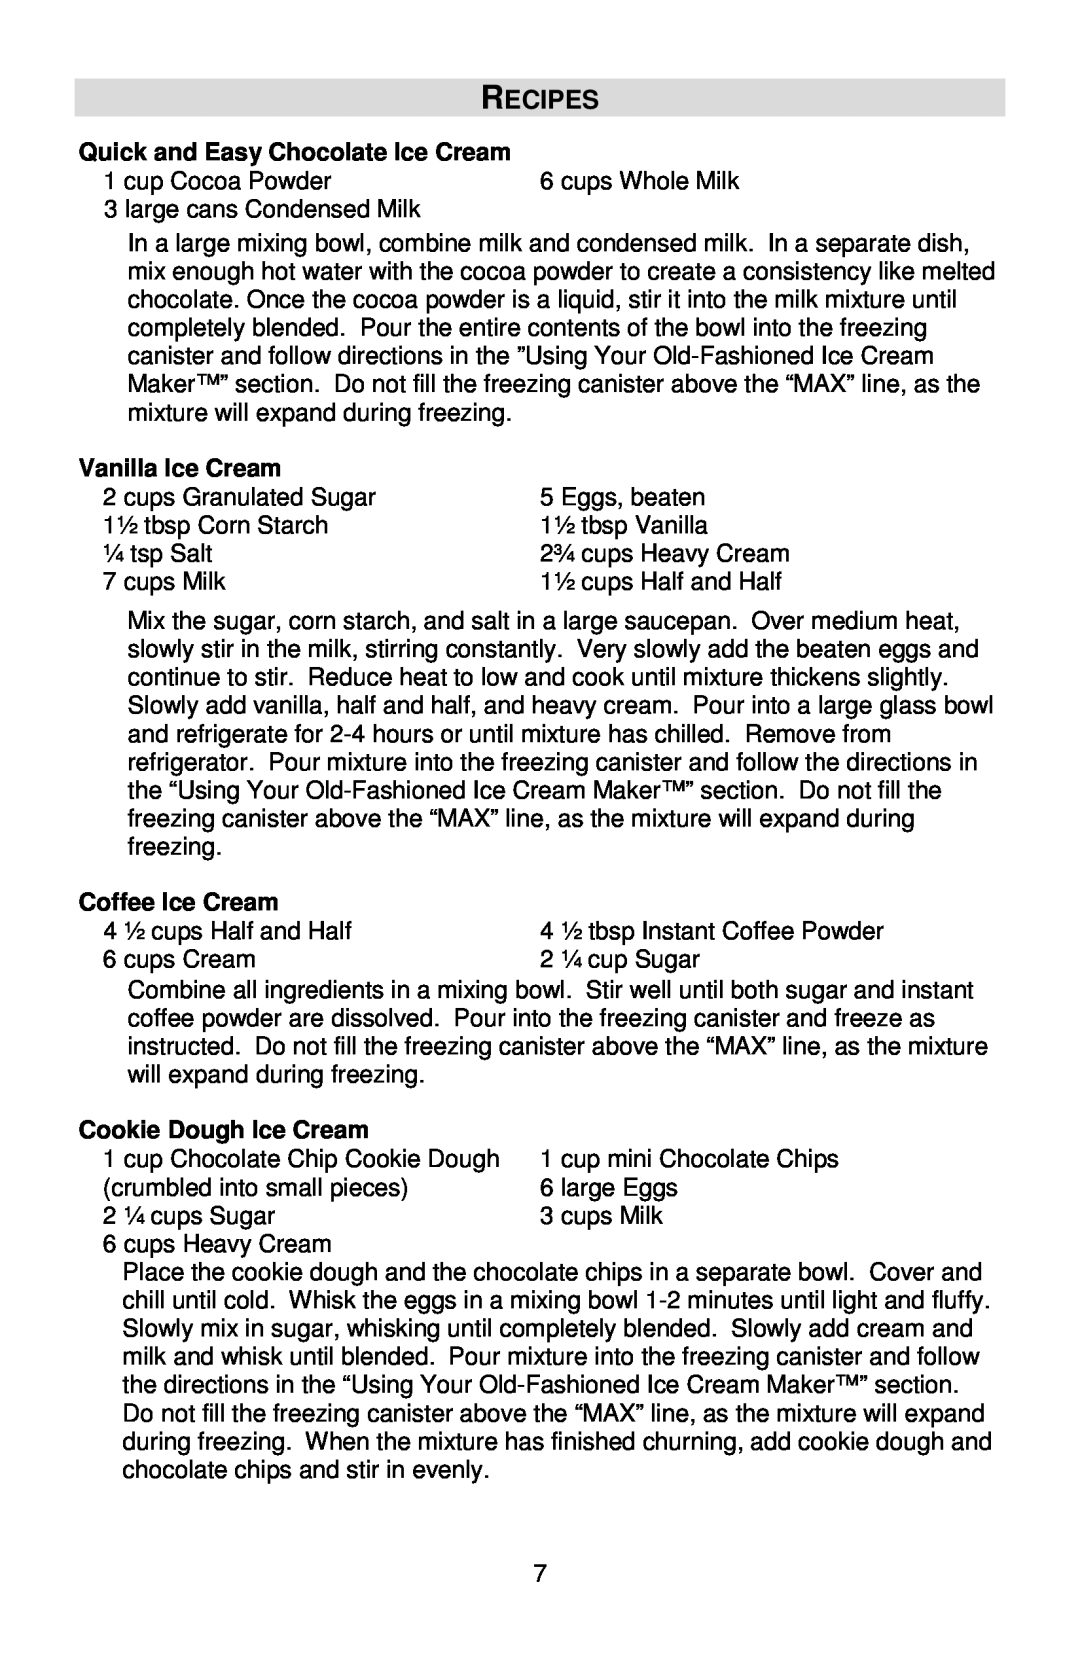 West Bend IC12701 Recipes, Quick and Easy Chocolate Ice Cream, Vanilla Ice Cream, Coffee Ice Cream, Cookie Dough Ice Cream 